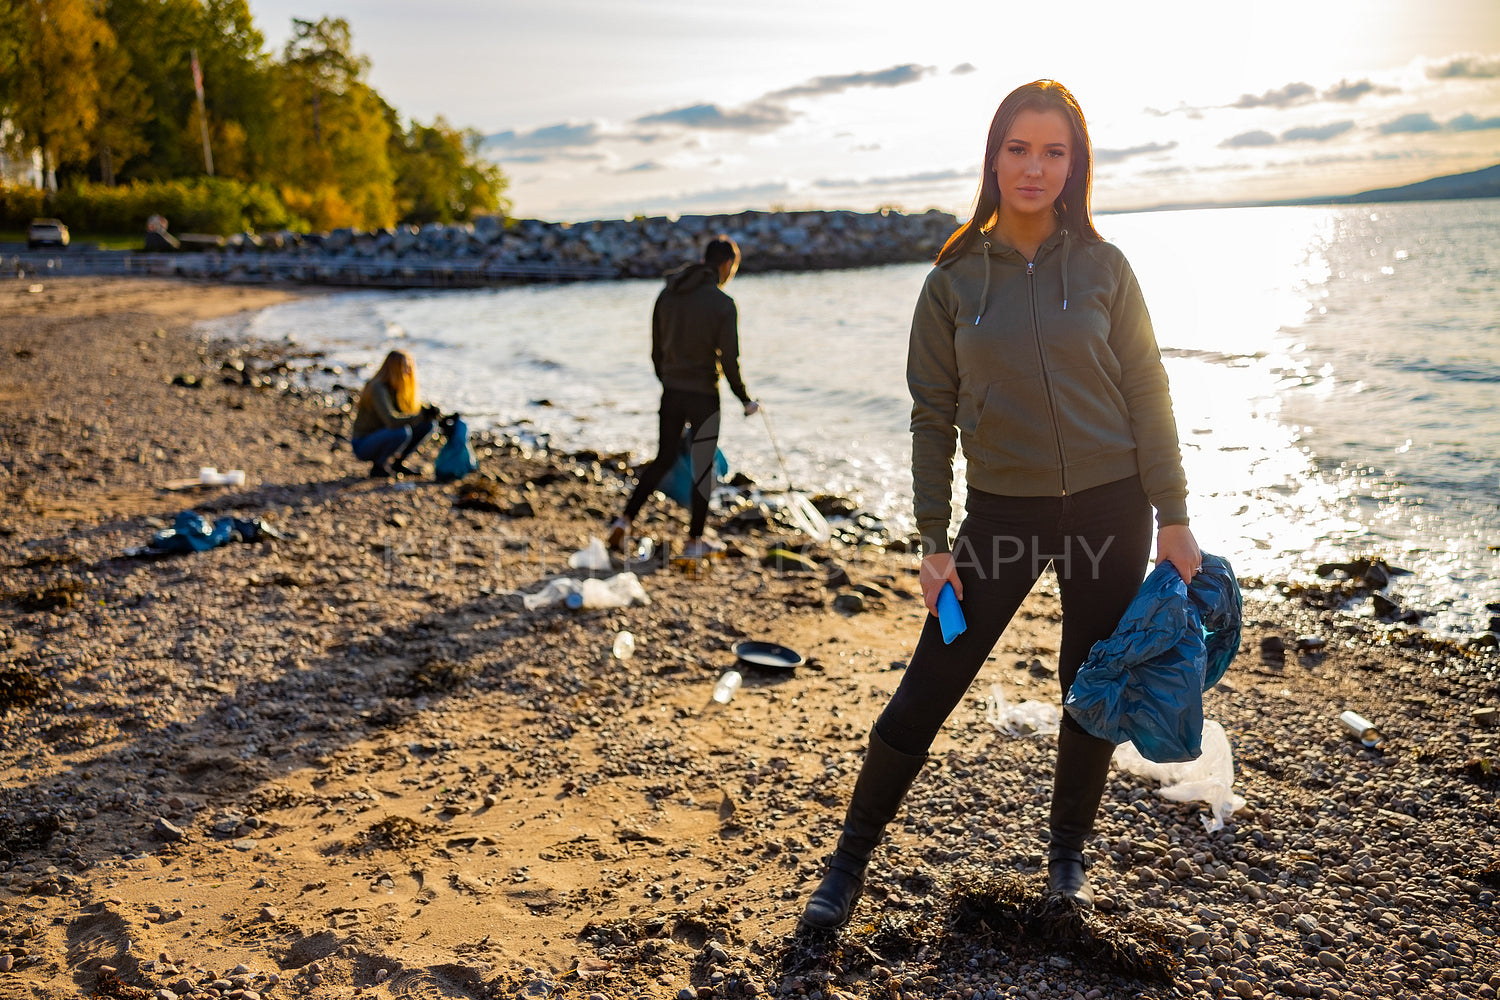 Serious young woman cleaning beach for plastic with volunteers during sunset